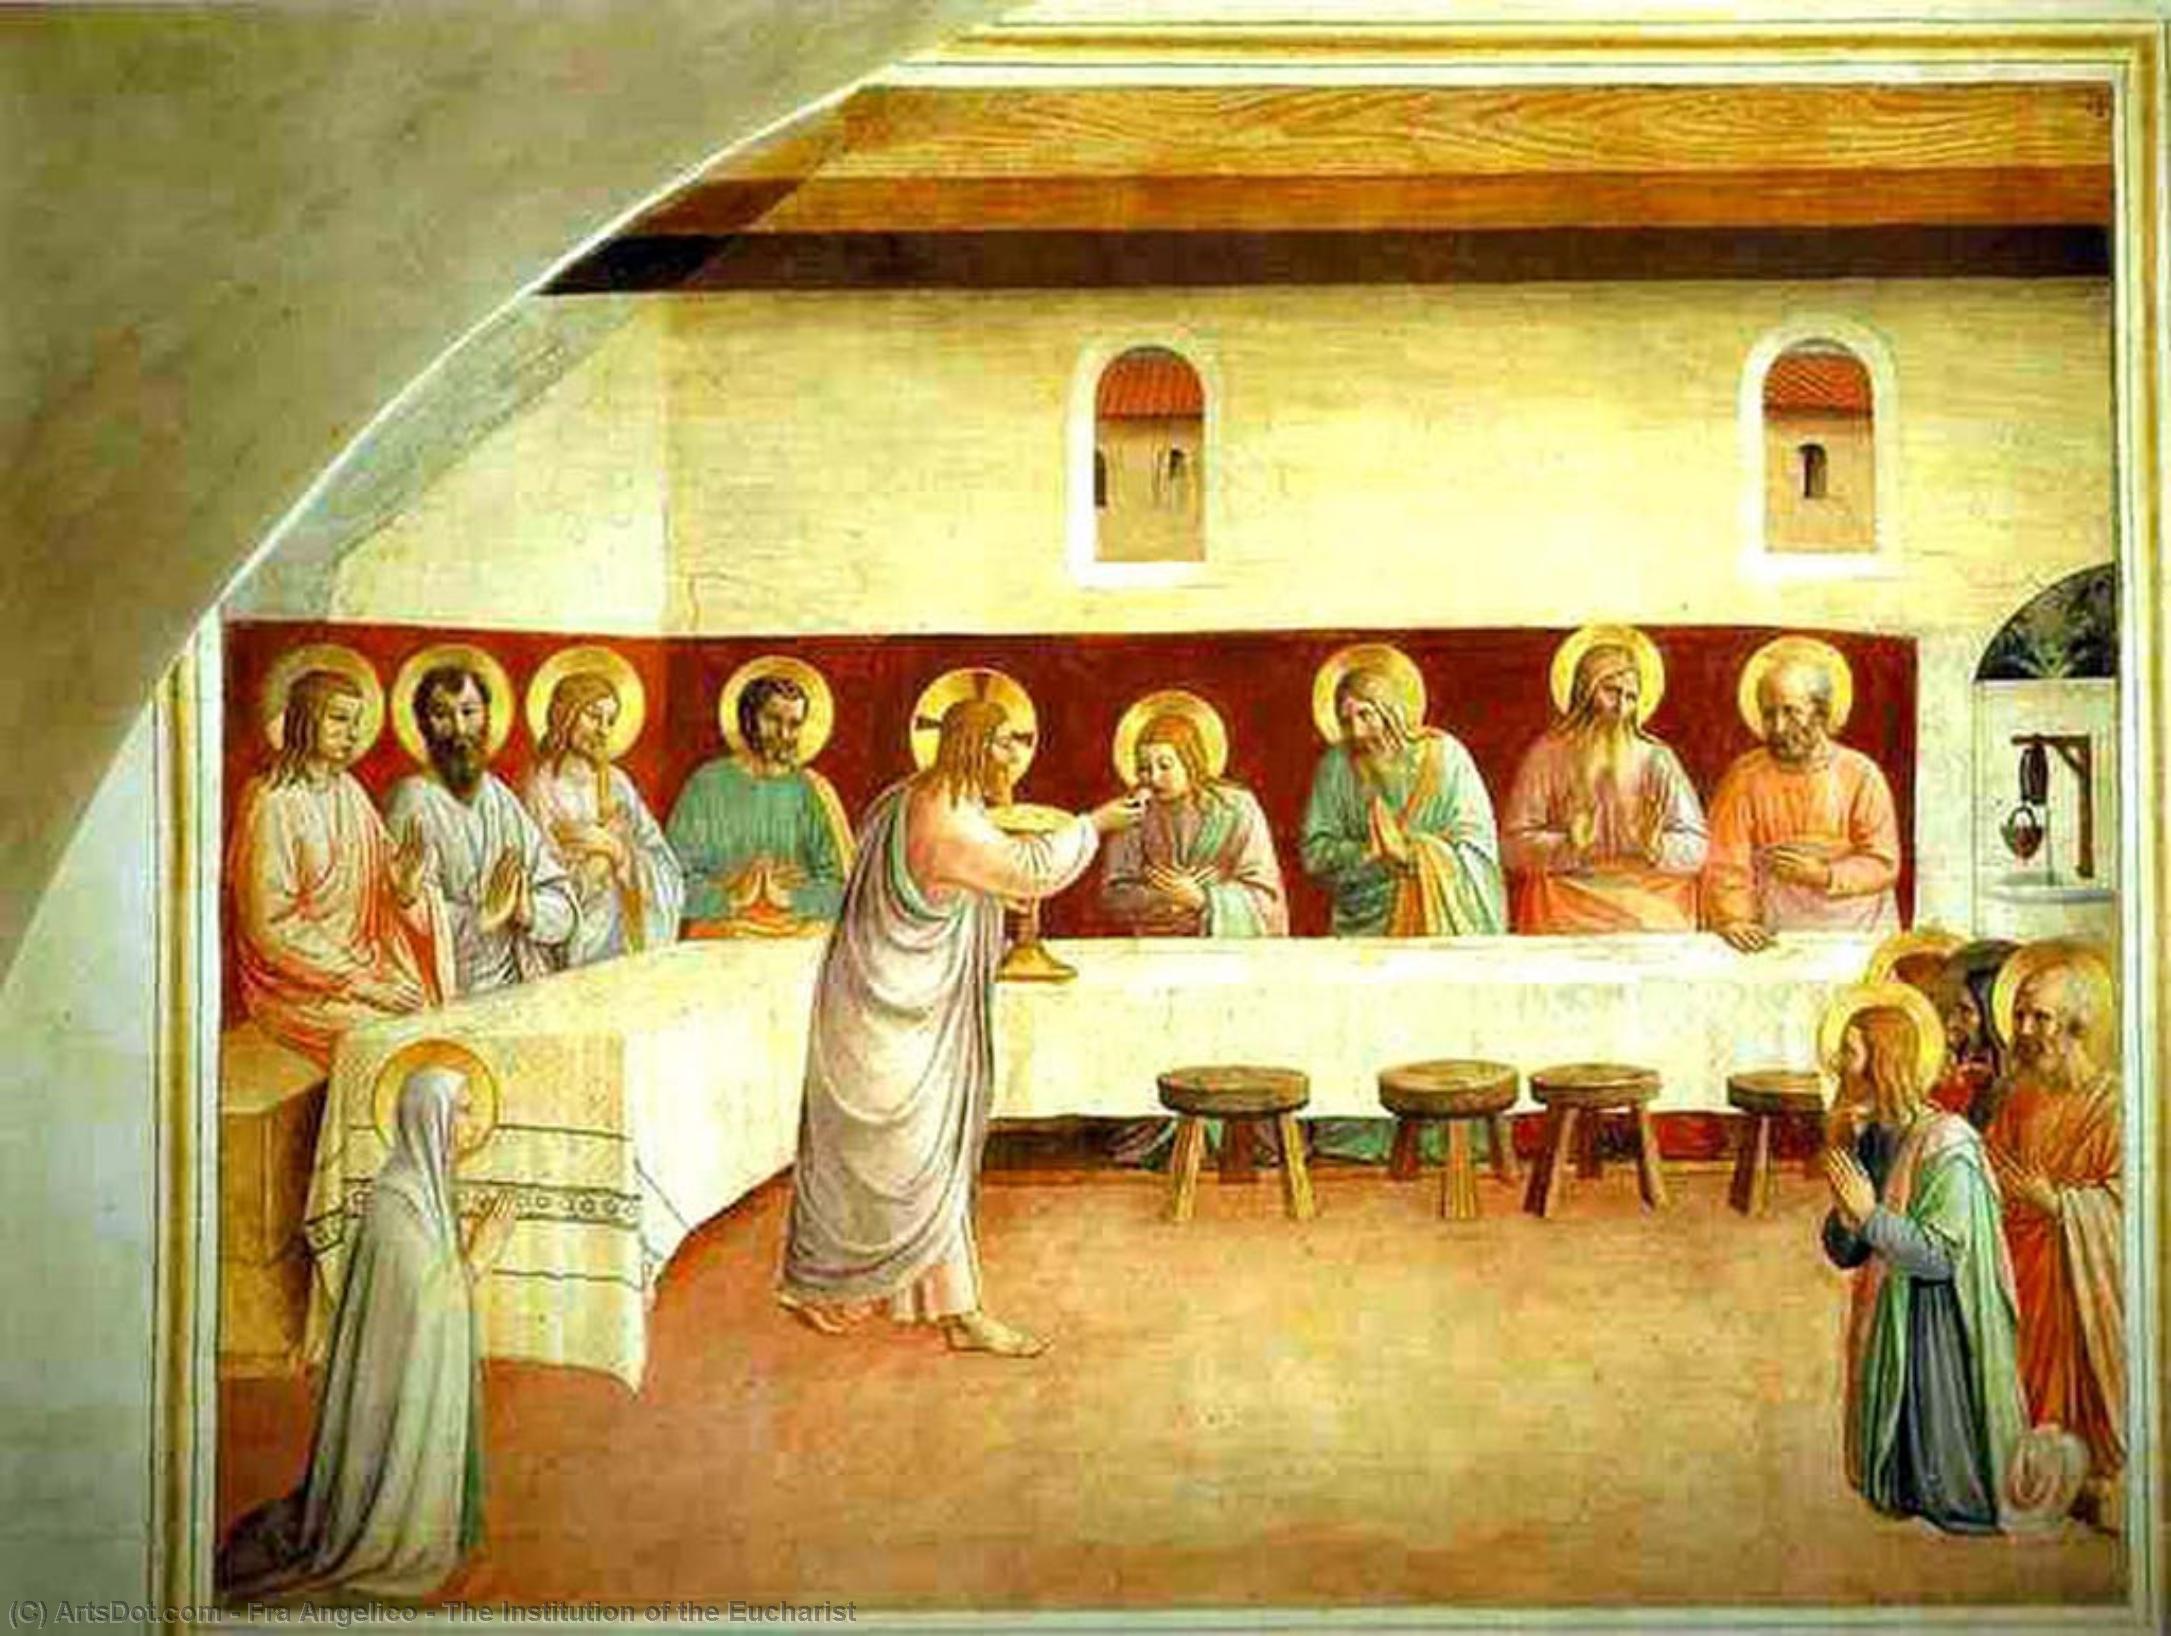 WikiOO.org - 백과 사전 - 회화, 삽화 Fra Angelico - The Institution of the Eucharist